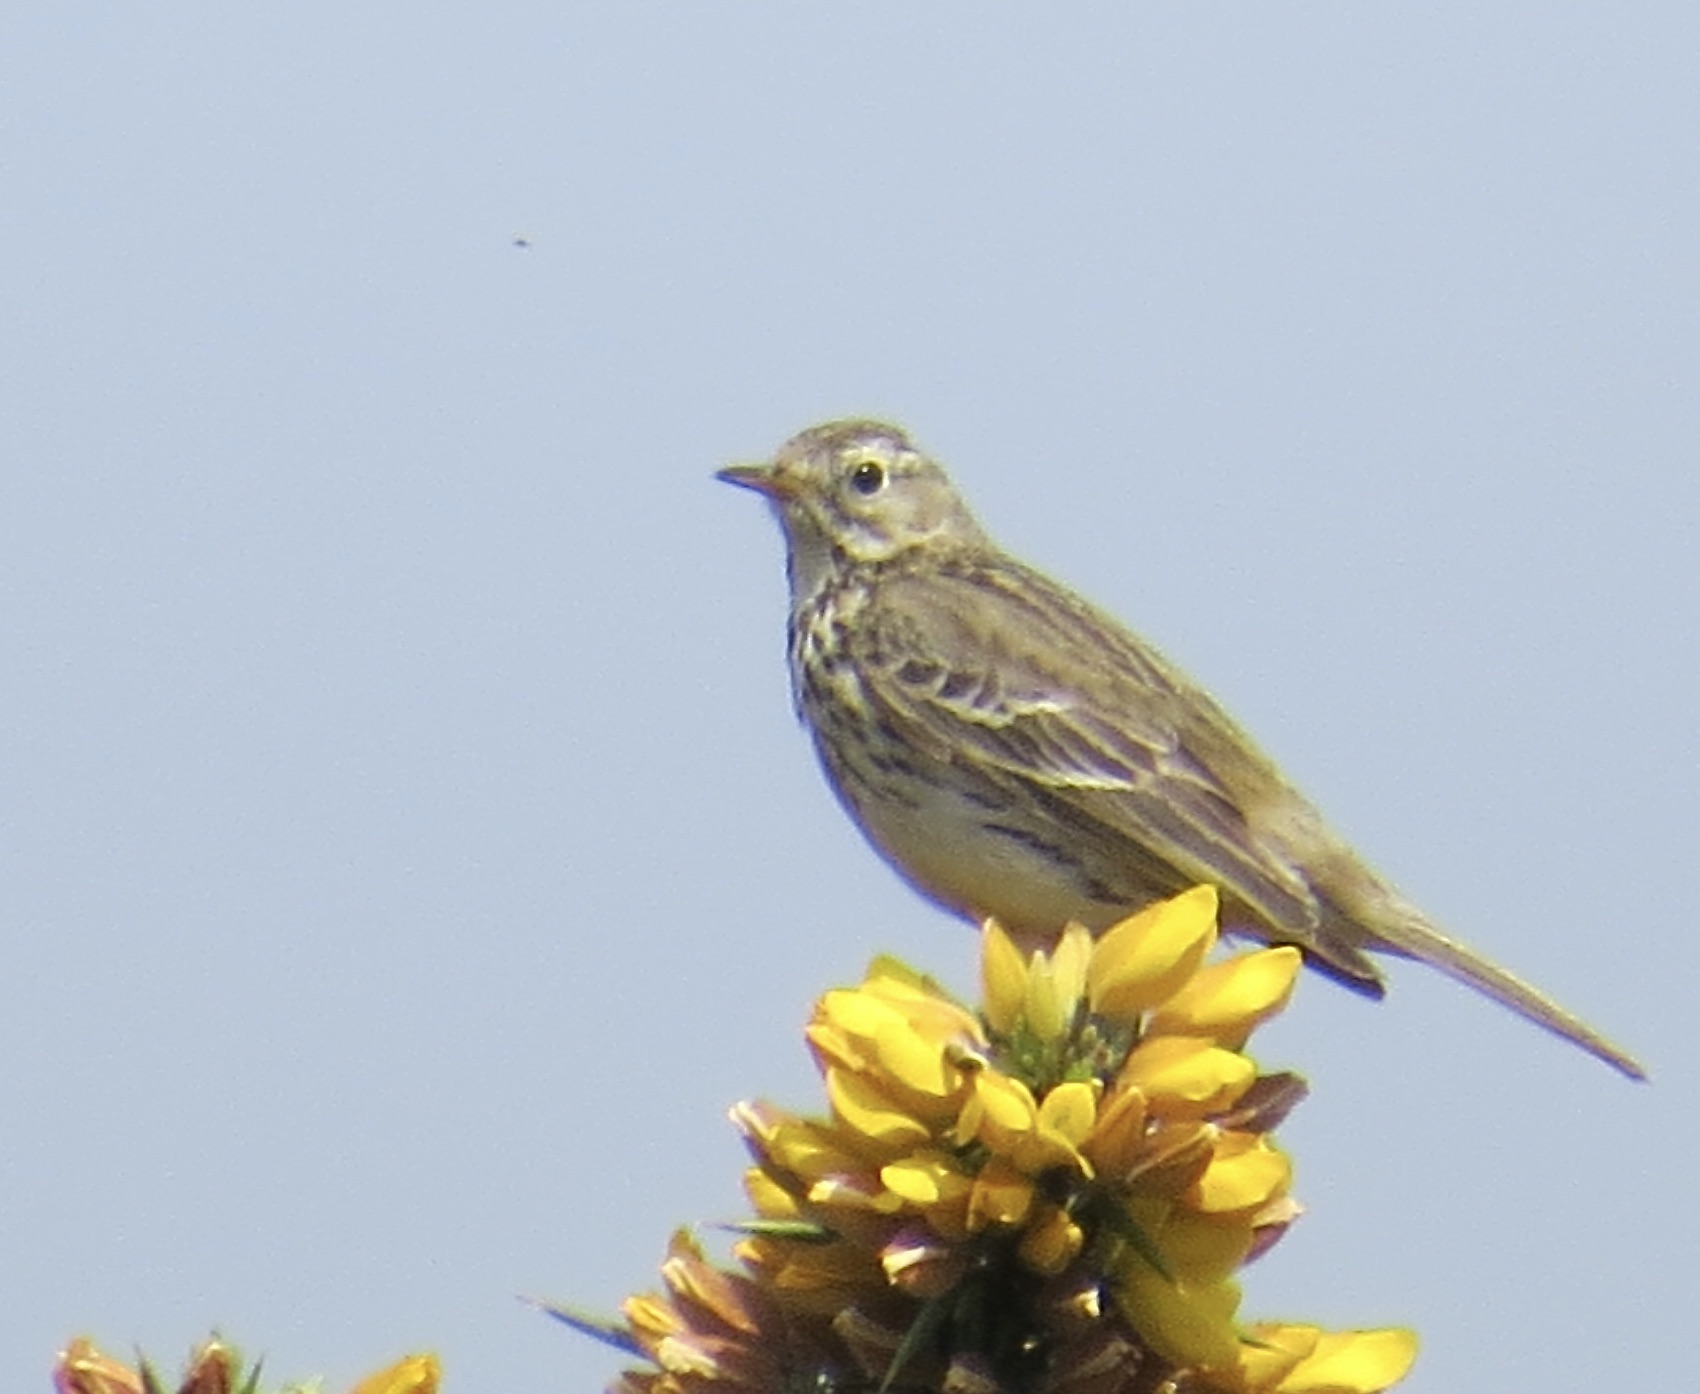 A Tree pipit getting ready to launch itself into its parachute display